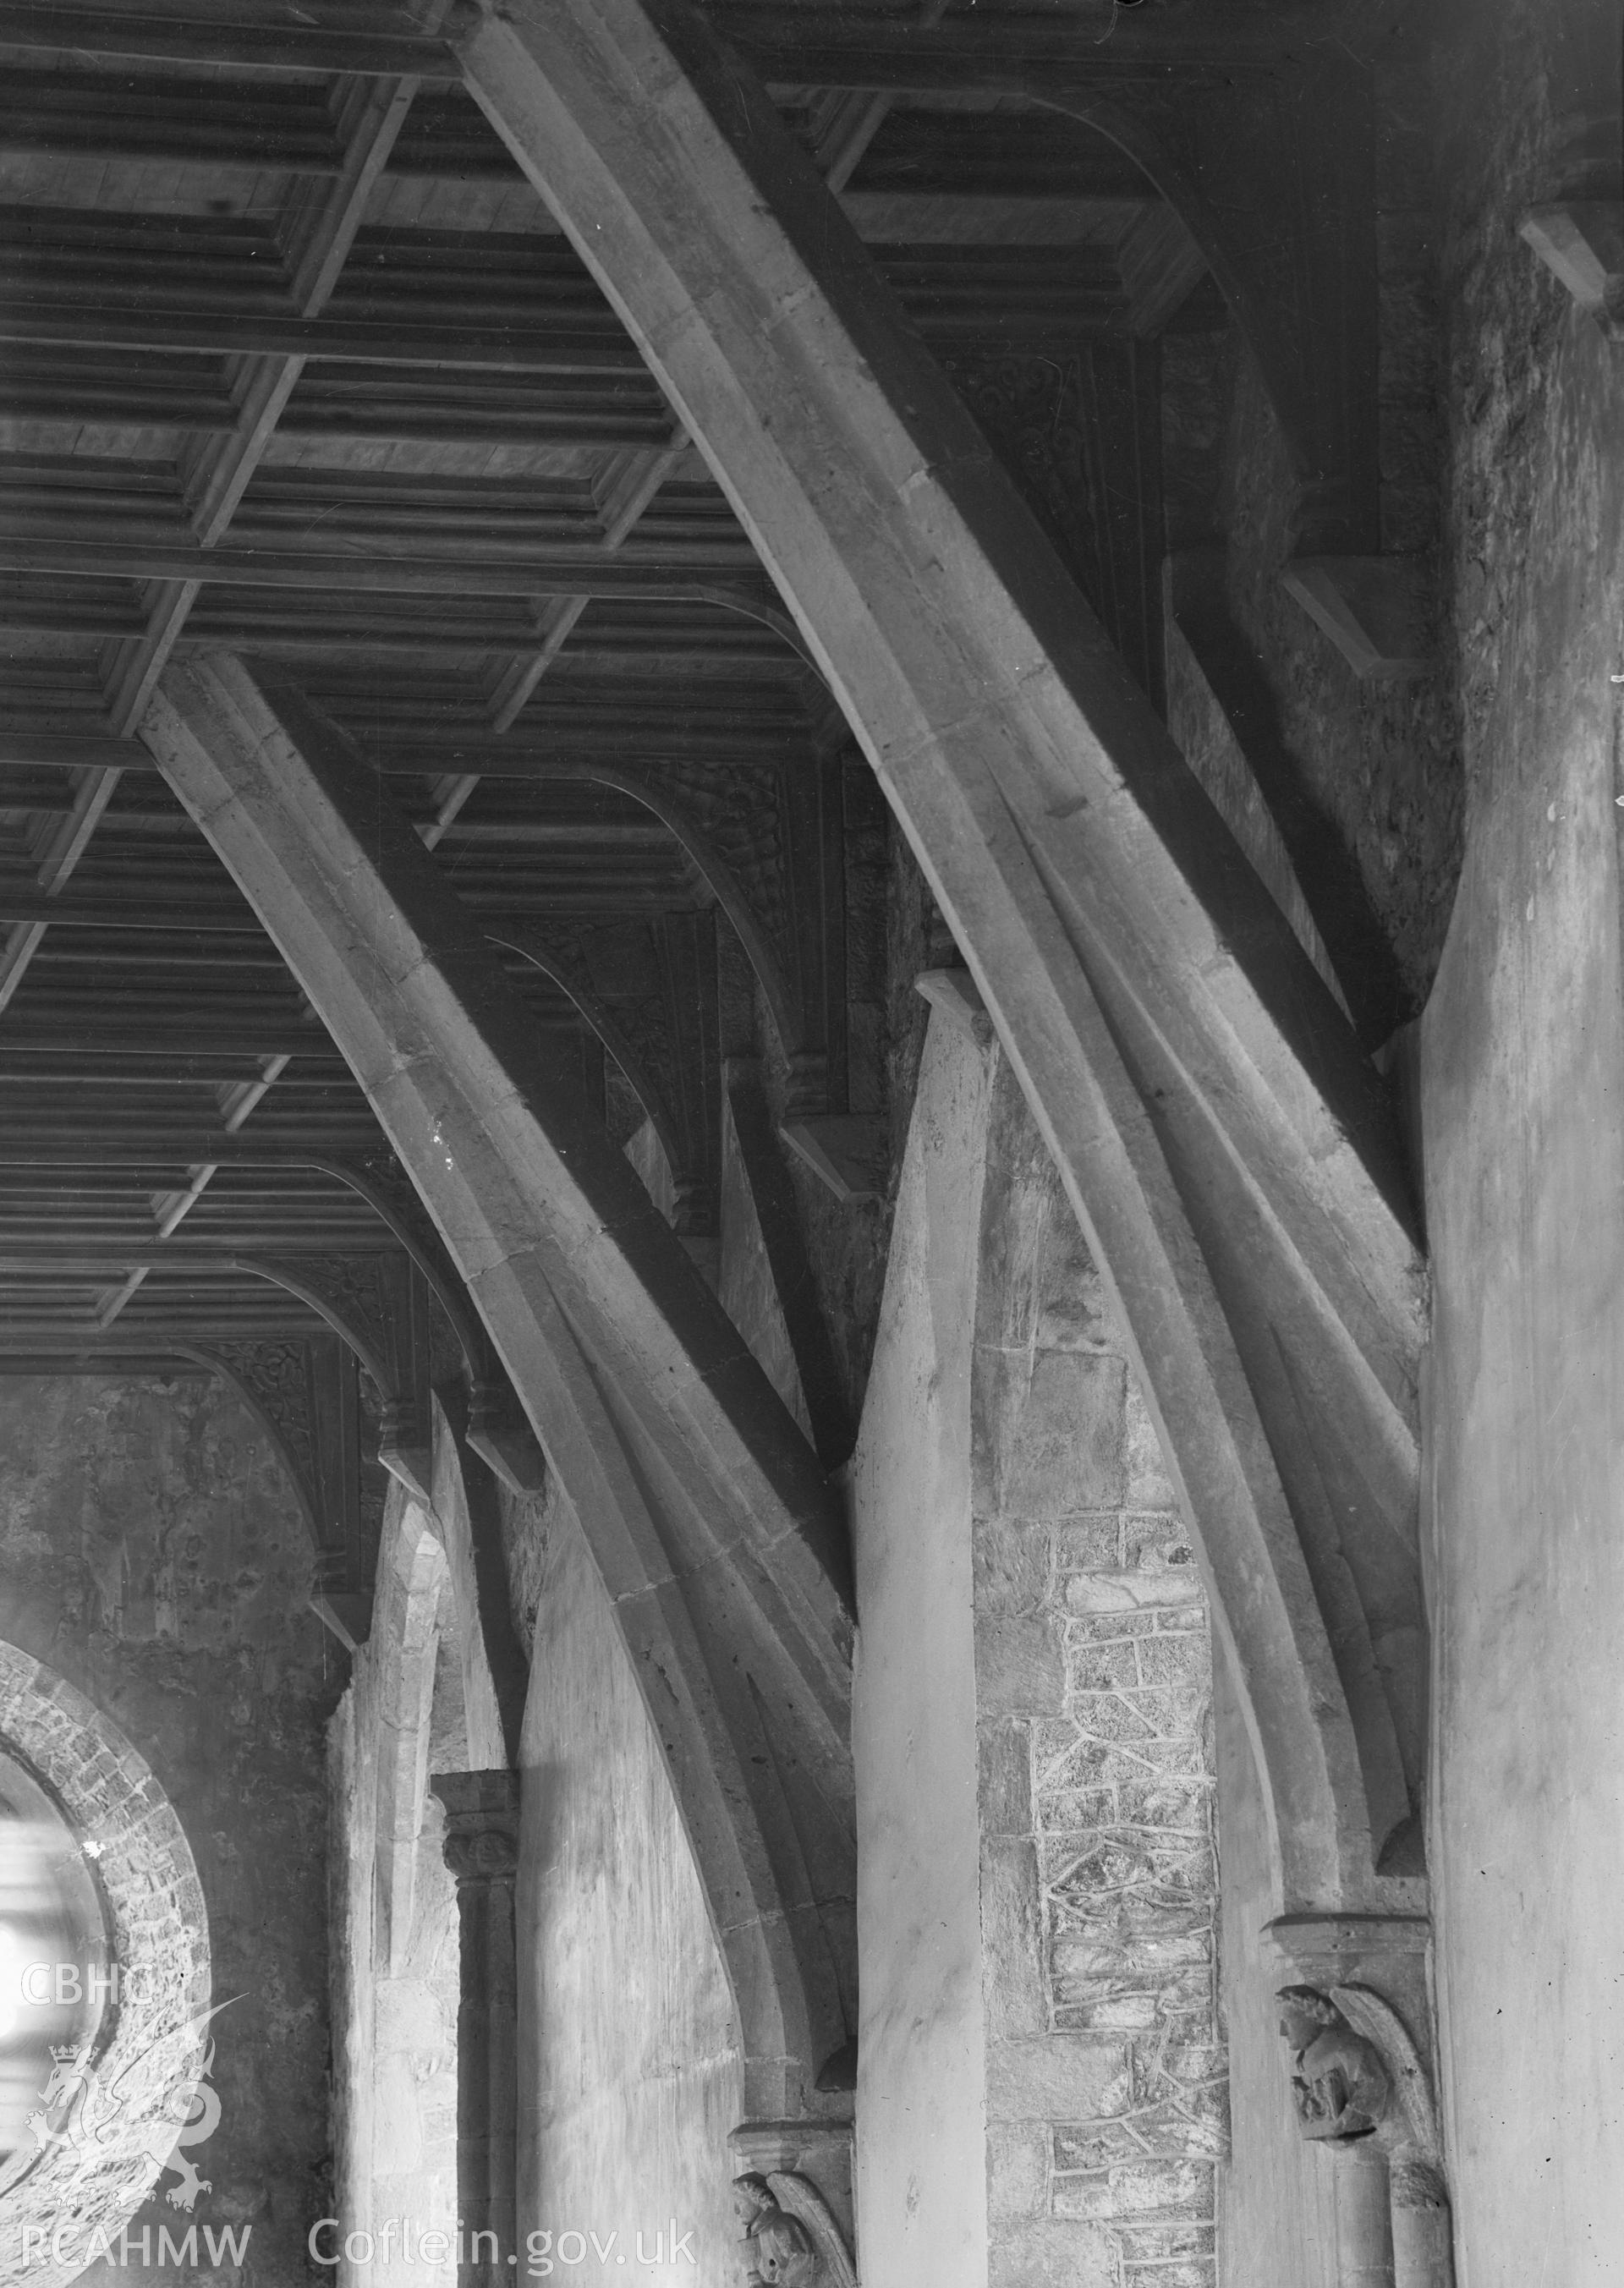 Digital copy of a black and white nitrate negative showing detailed view of vaulted ceiling at St. David's Cathedral, taken by E.W. Lovegrove, July 1936.